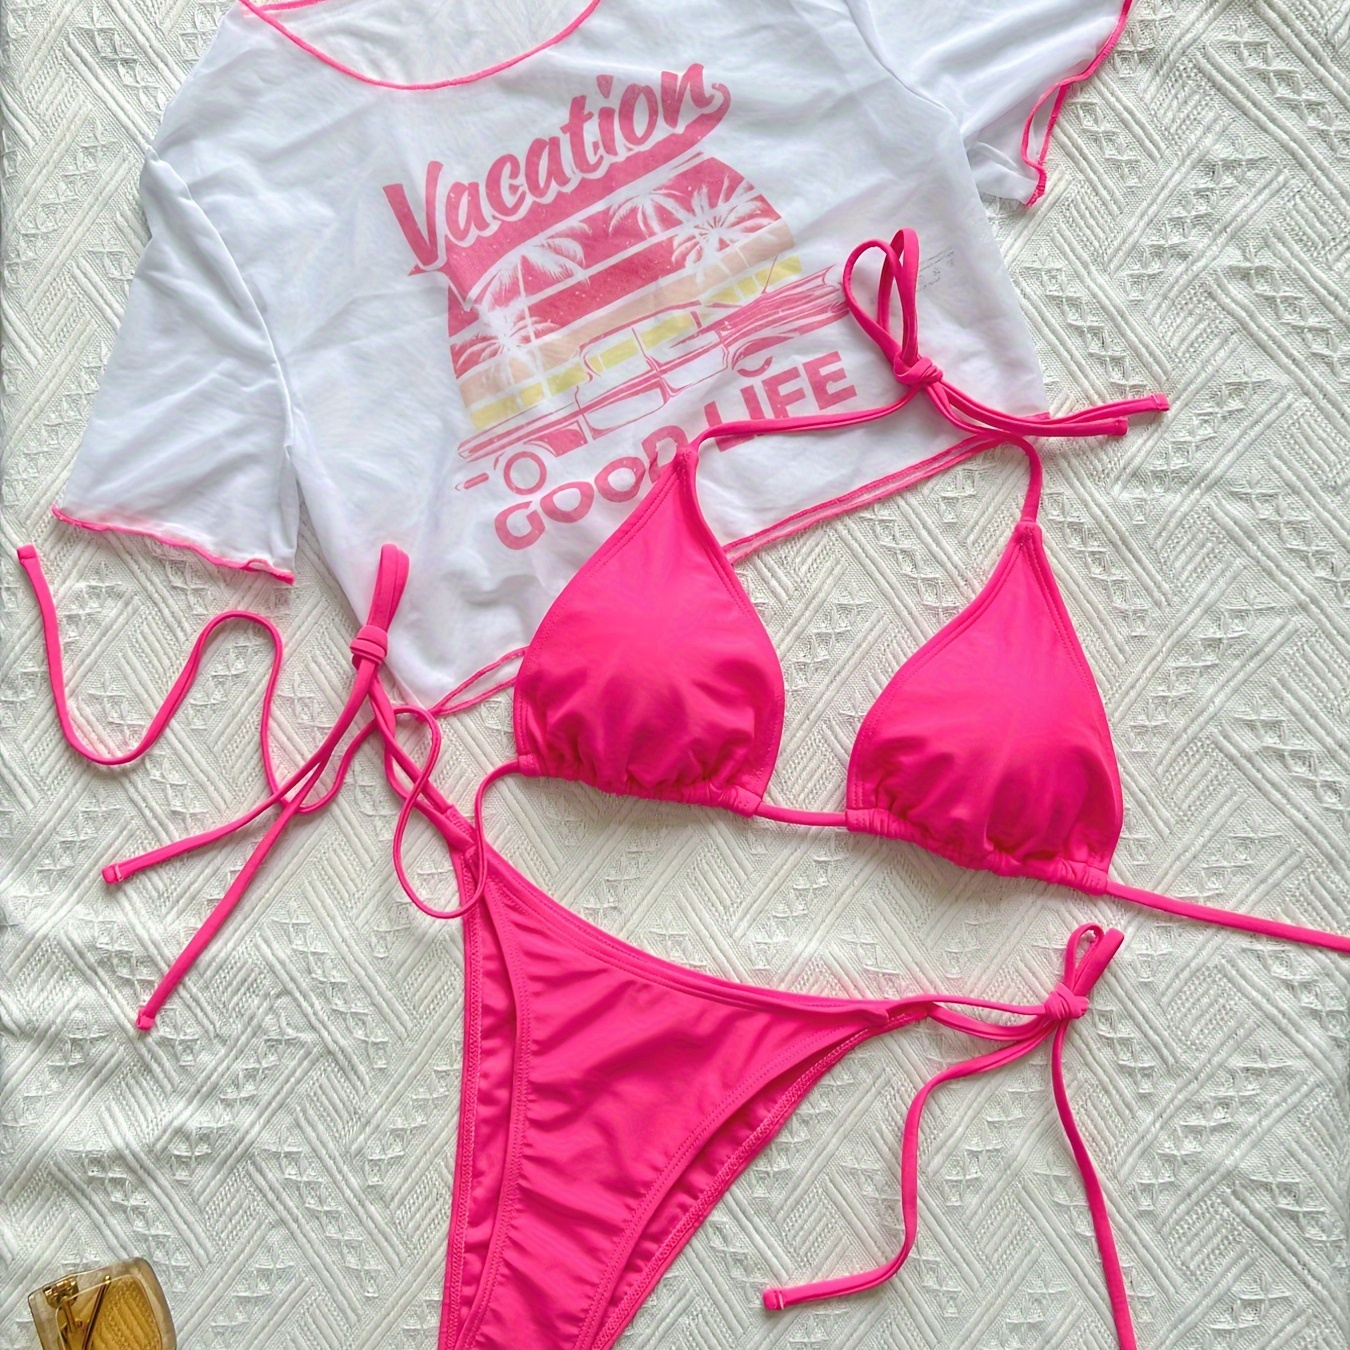 

3-piece Bikini Set With Vacation Print, Includes Crop Top Sun Protection, Adjustable , Pink And White